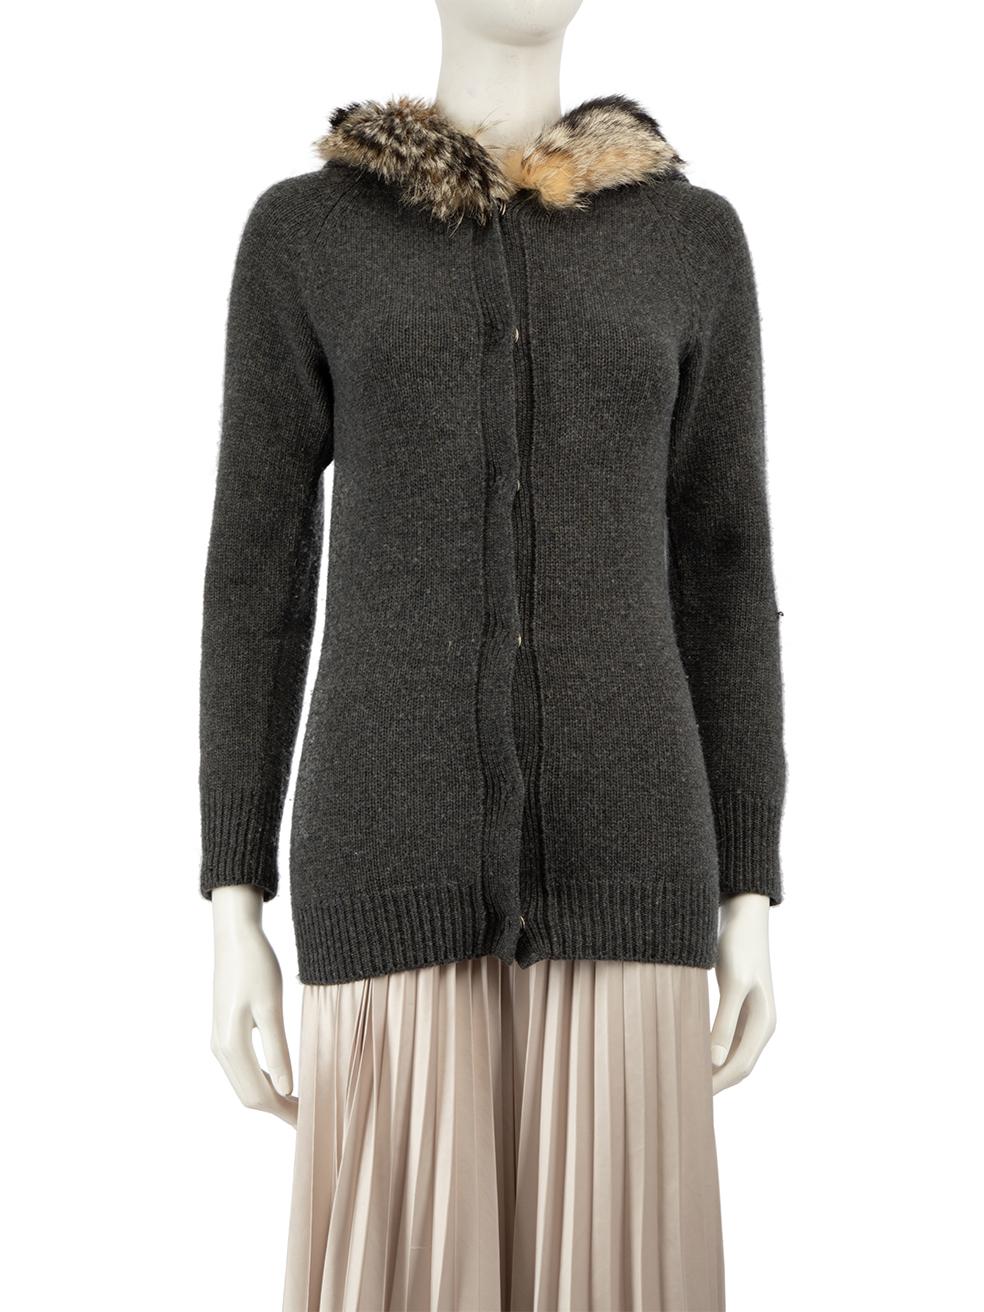 CONDITION is Very good. Hardly any visible wear to knit is evident on this used Prada designer resale item.
 
 
 
 Details
 
 
 Grey
 
 Wool
 
 Knit cardigan
 
 Hooded
 
 Fox fur trim
 
 Long sleeves
 
 Snap button fastening
 
 
 
 
 
 Made in